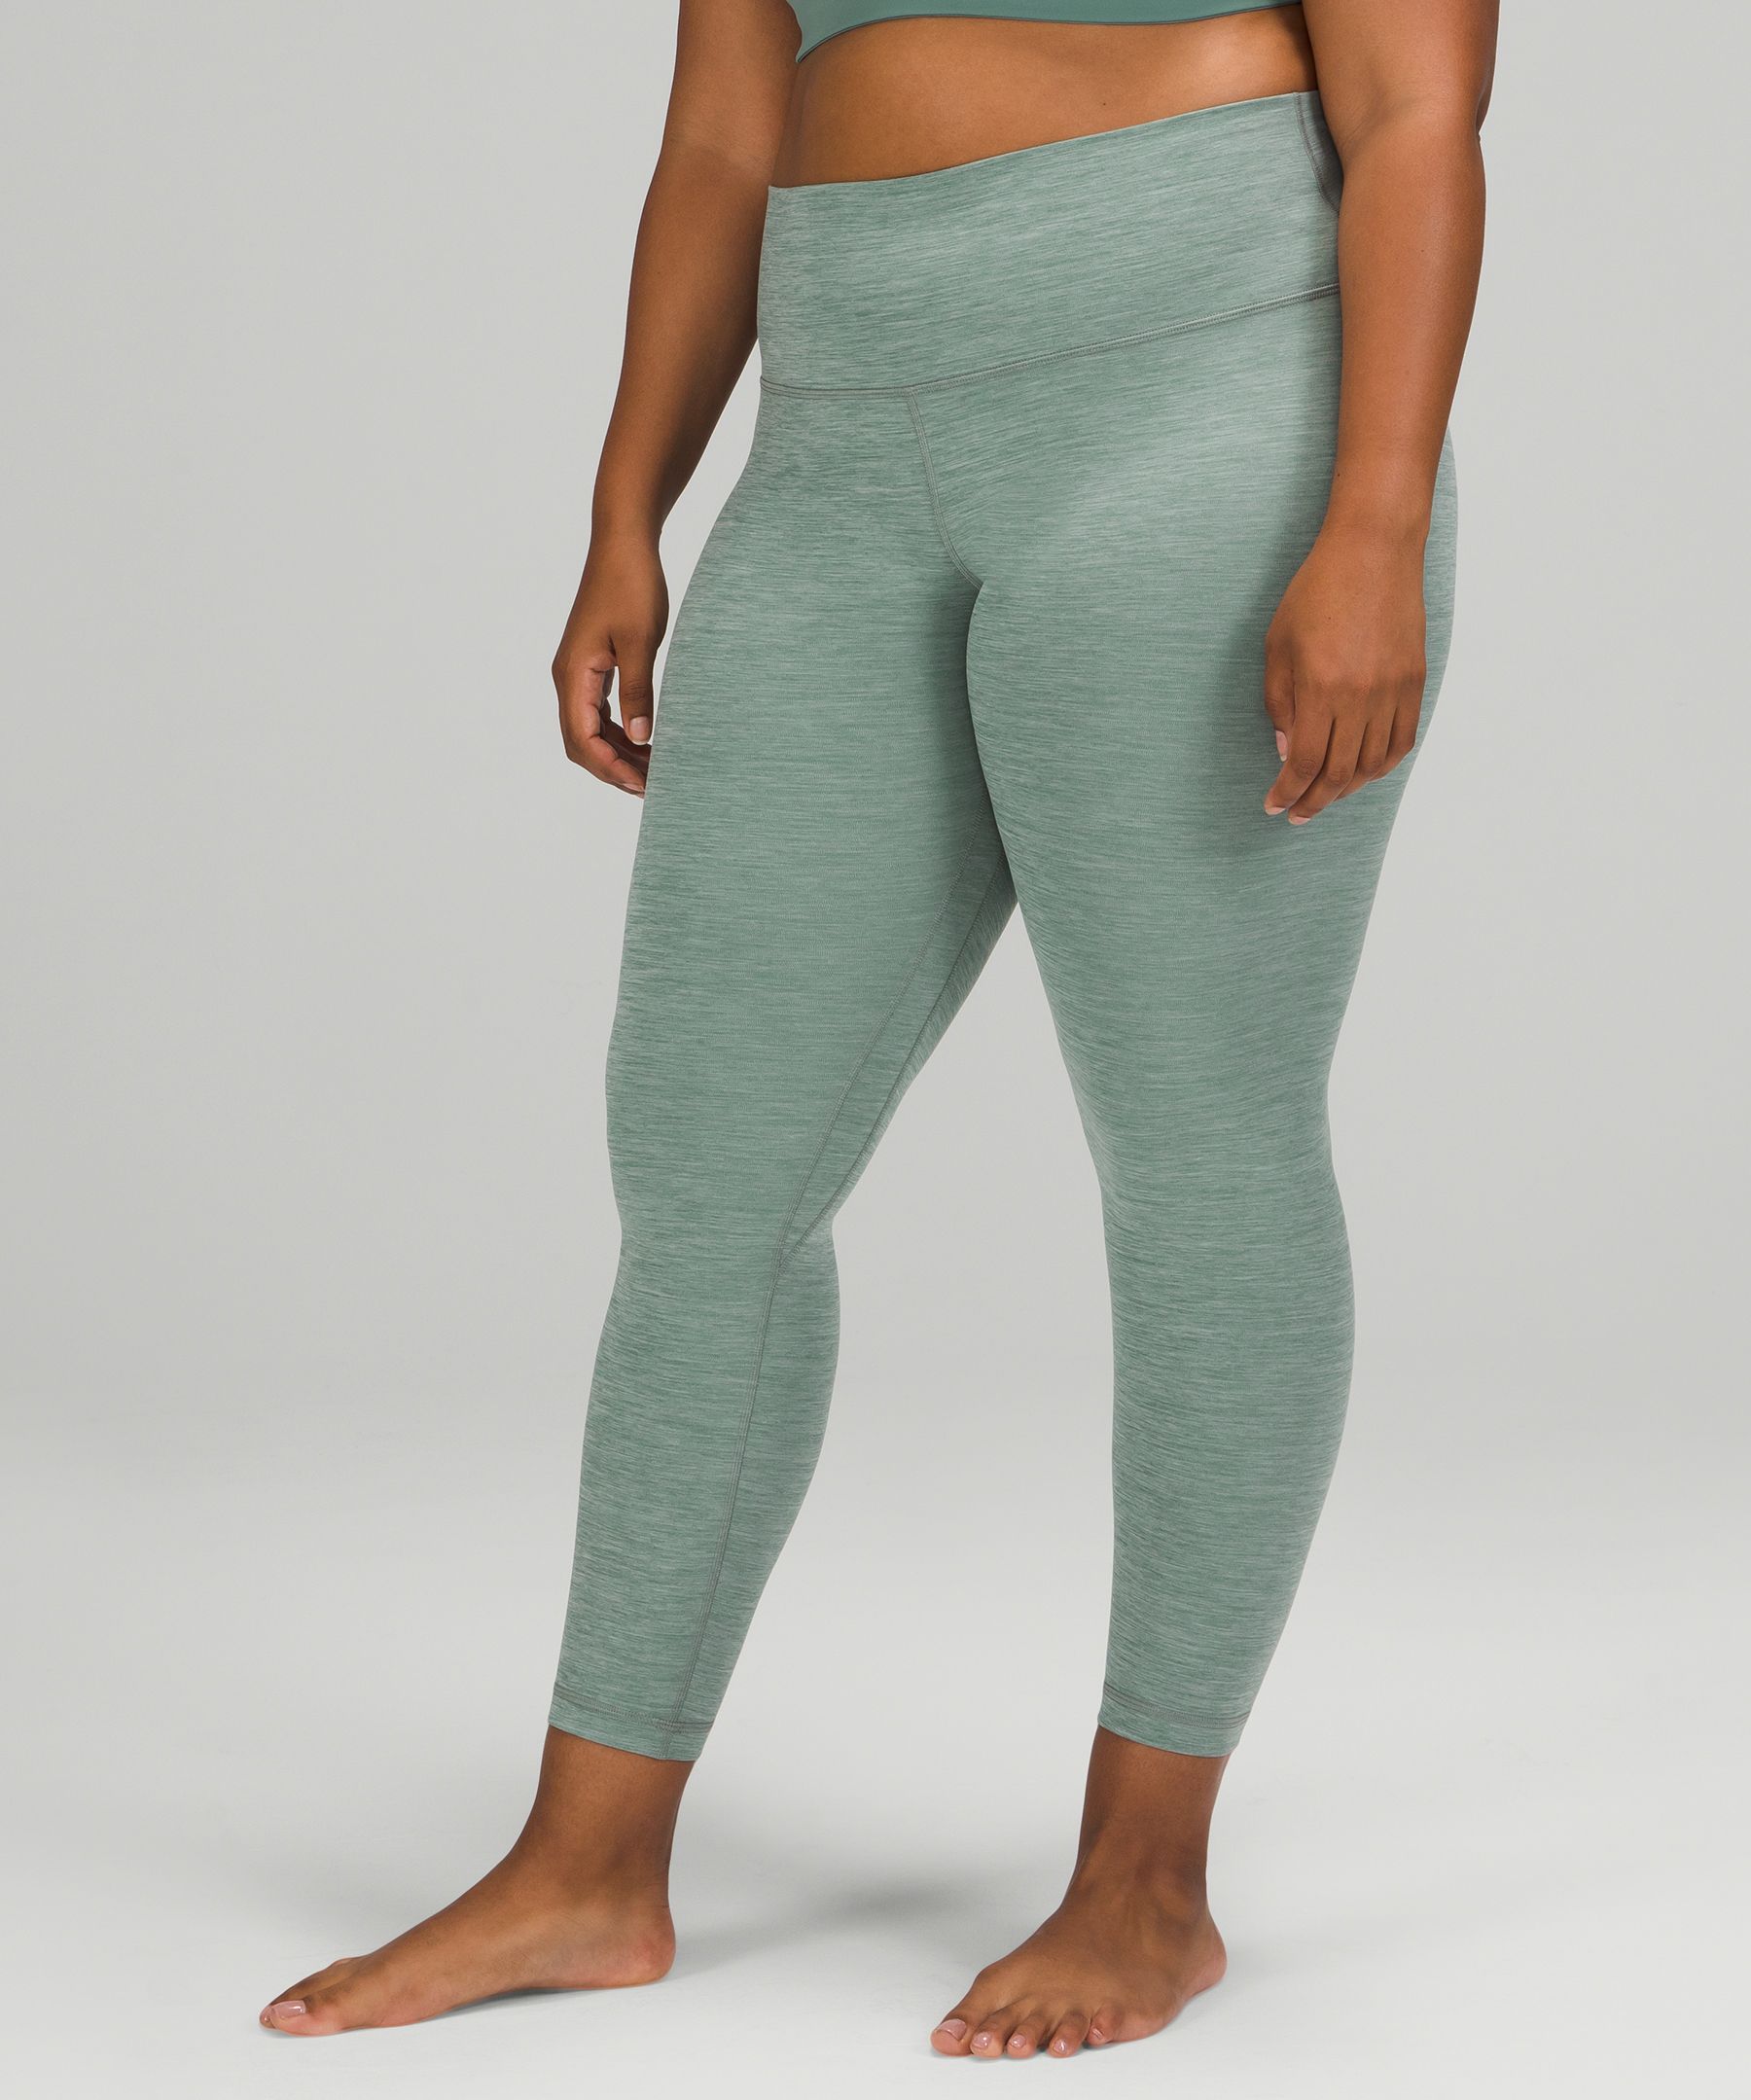 Lululemon Align™ High-rise Pants 25" In Heathered Tidewater Teal